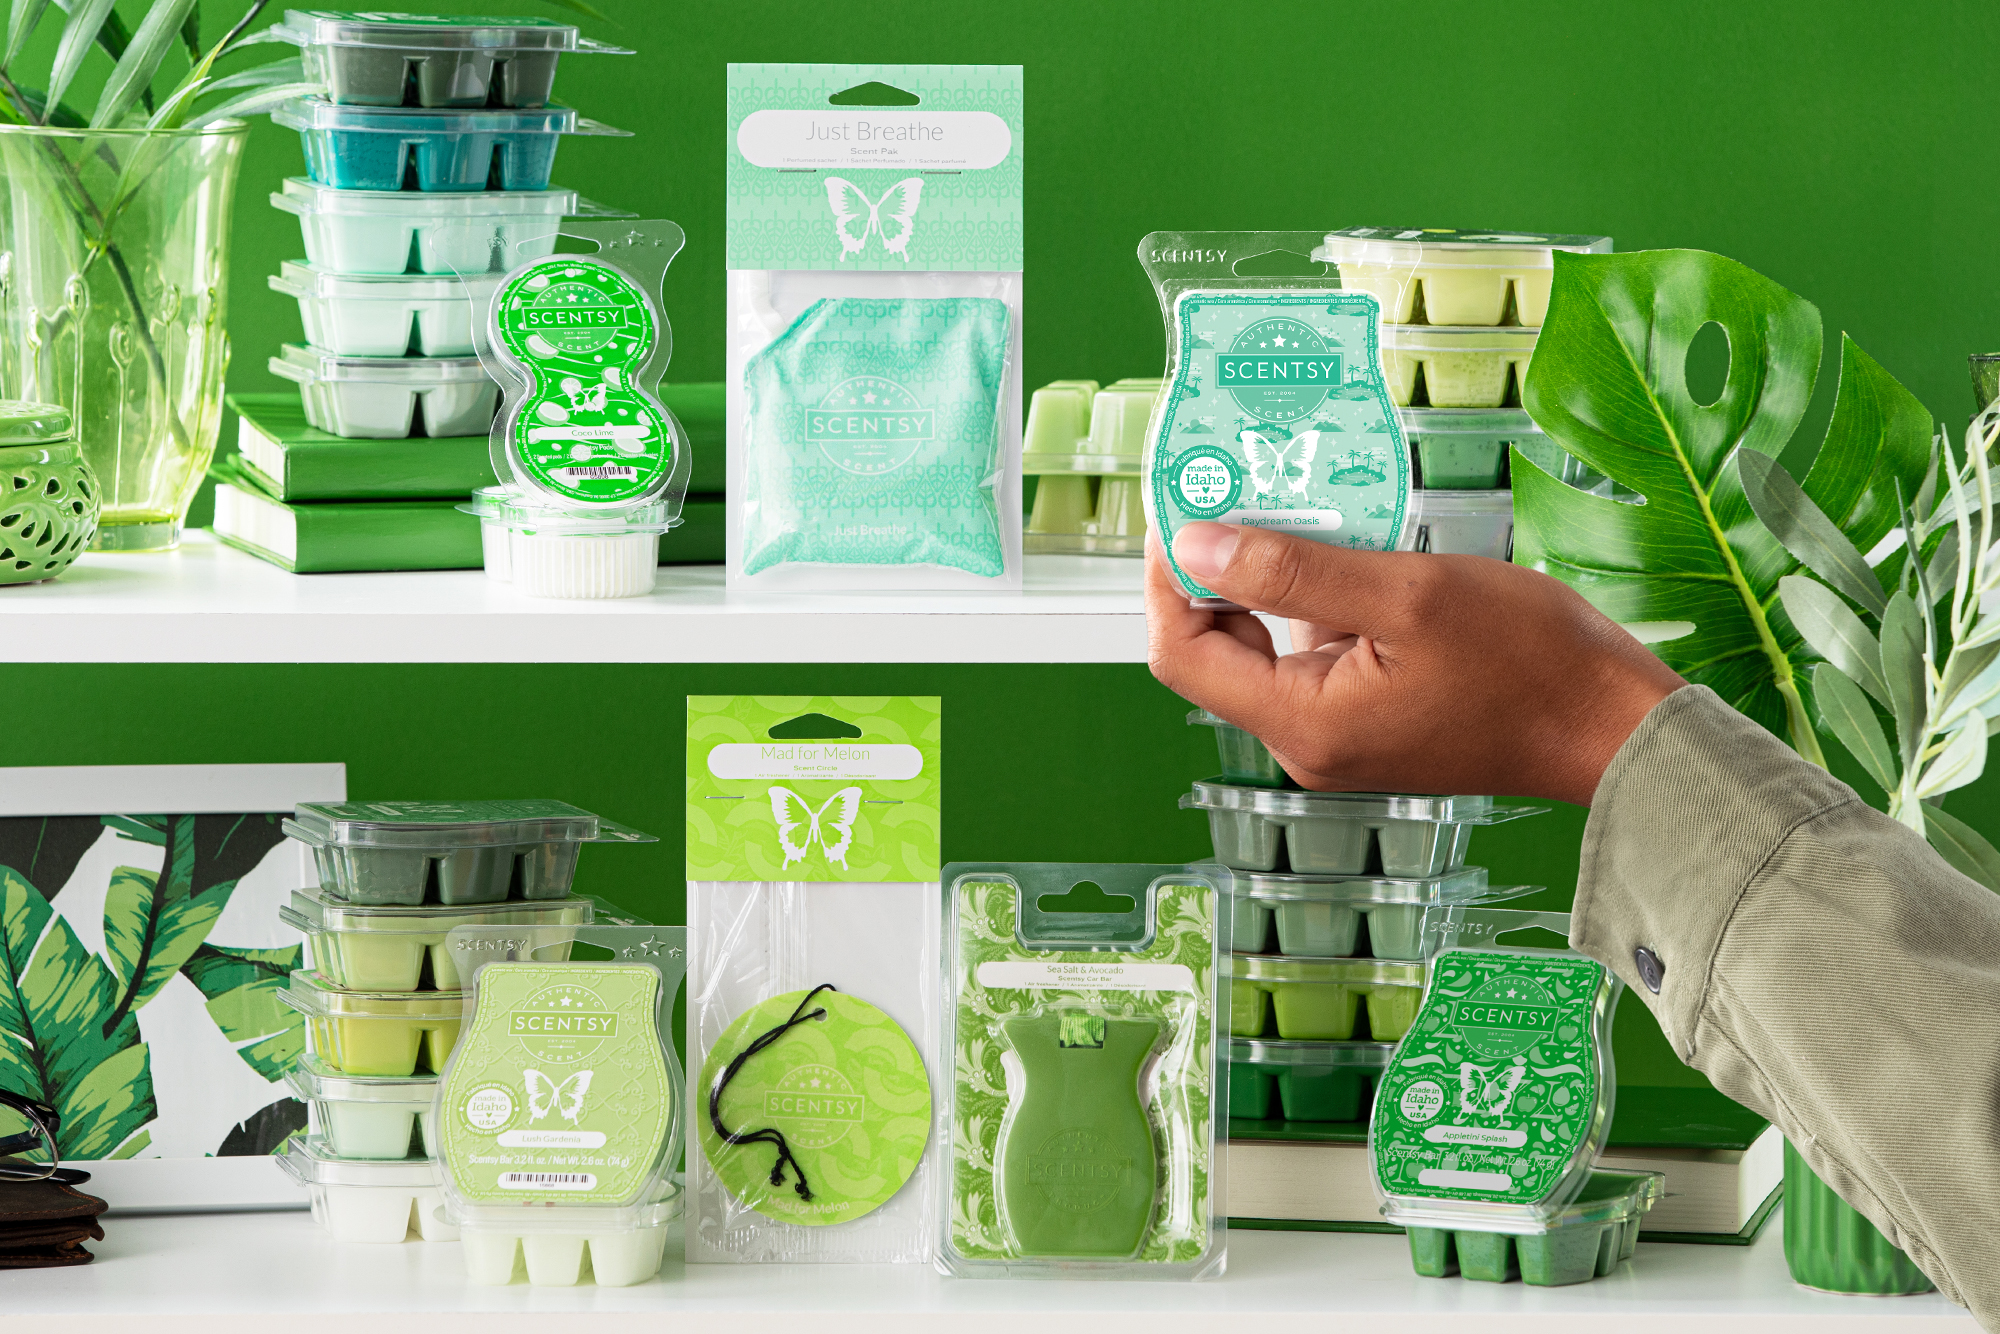 Scentsy stylized photo of all green products